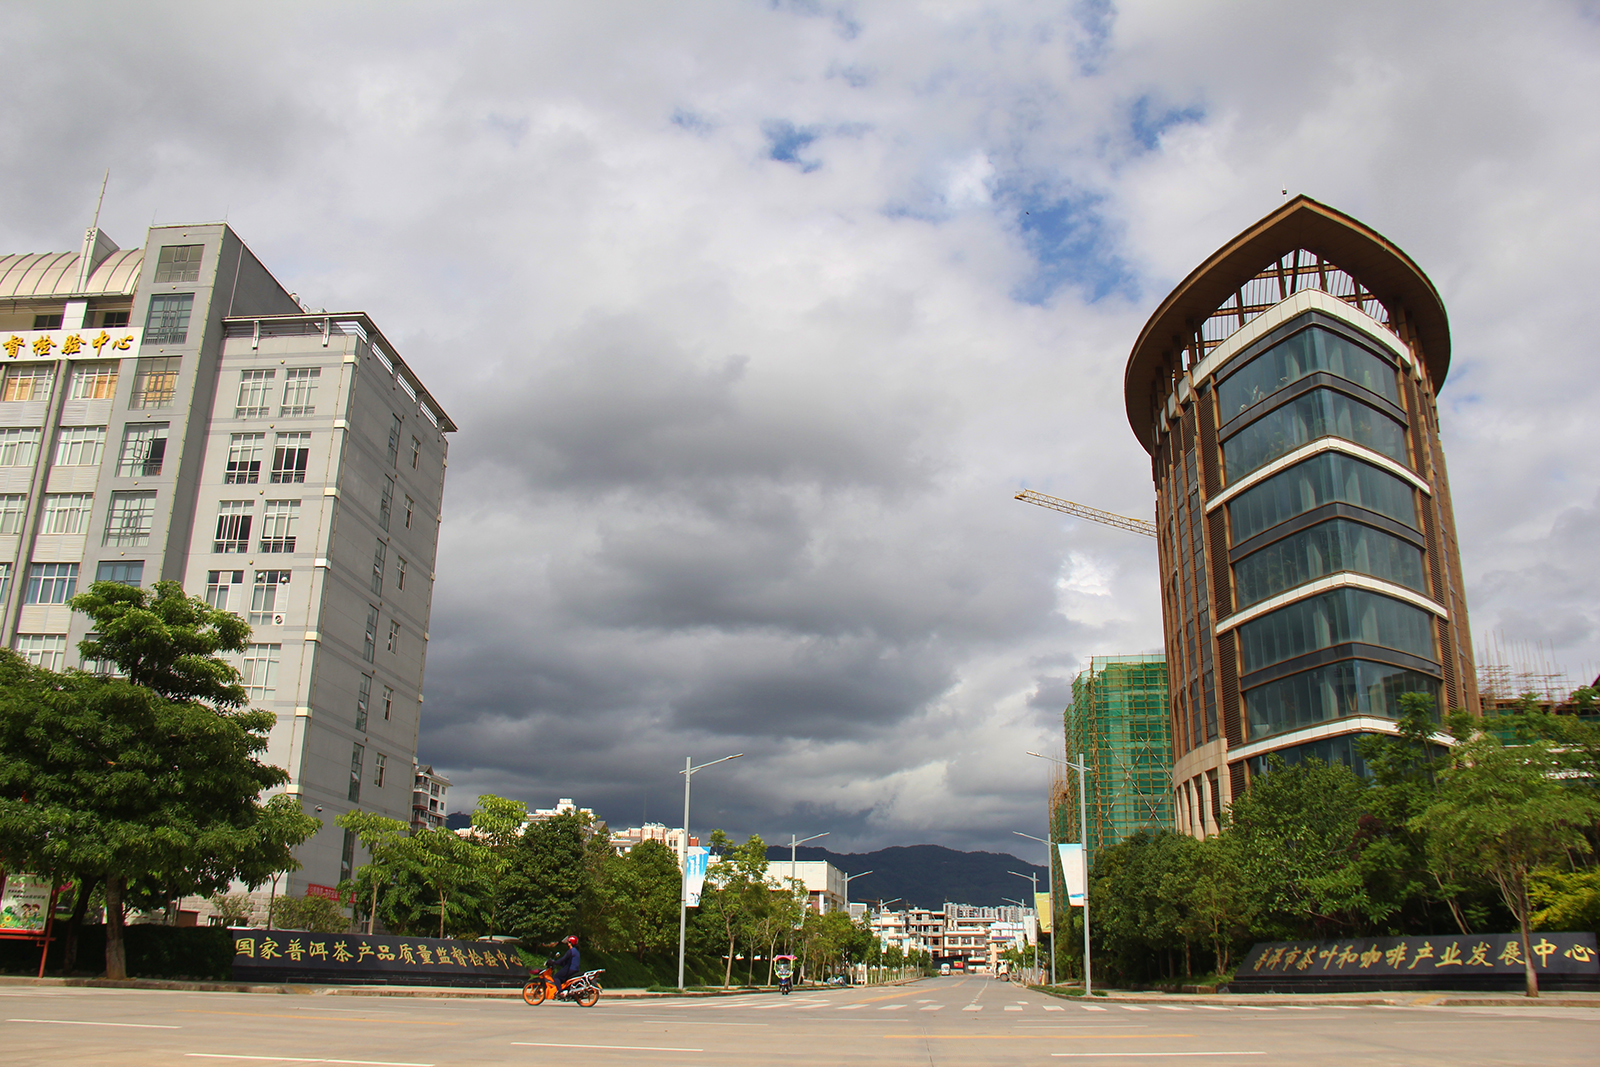 Pu’er Tea and Coffee Industrial Development Center was founded this year to promote coffee